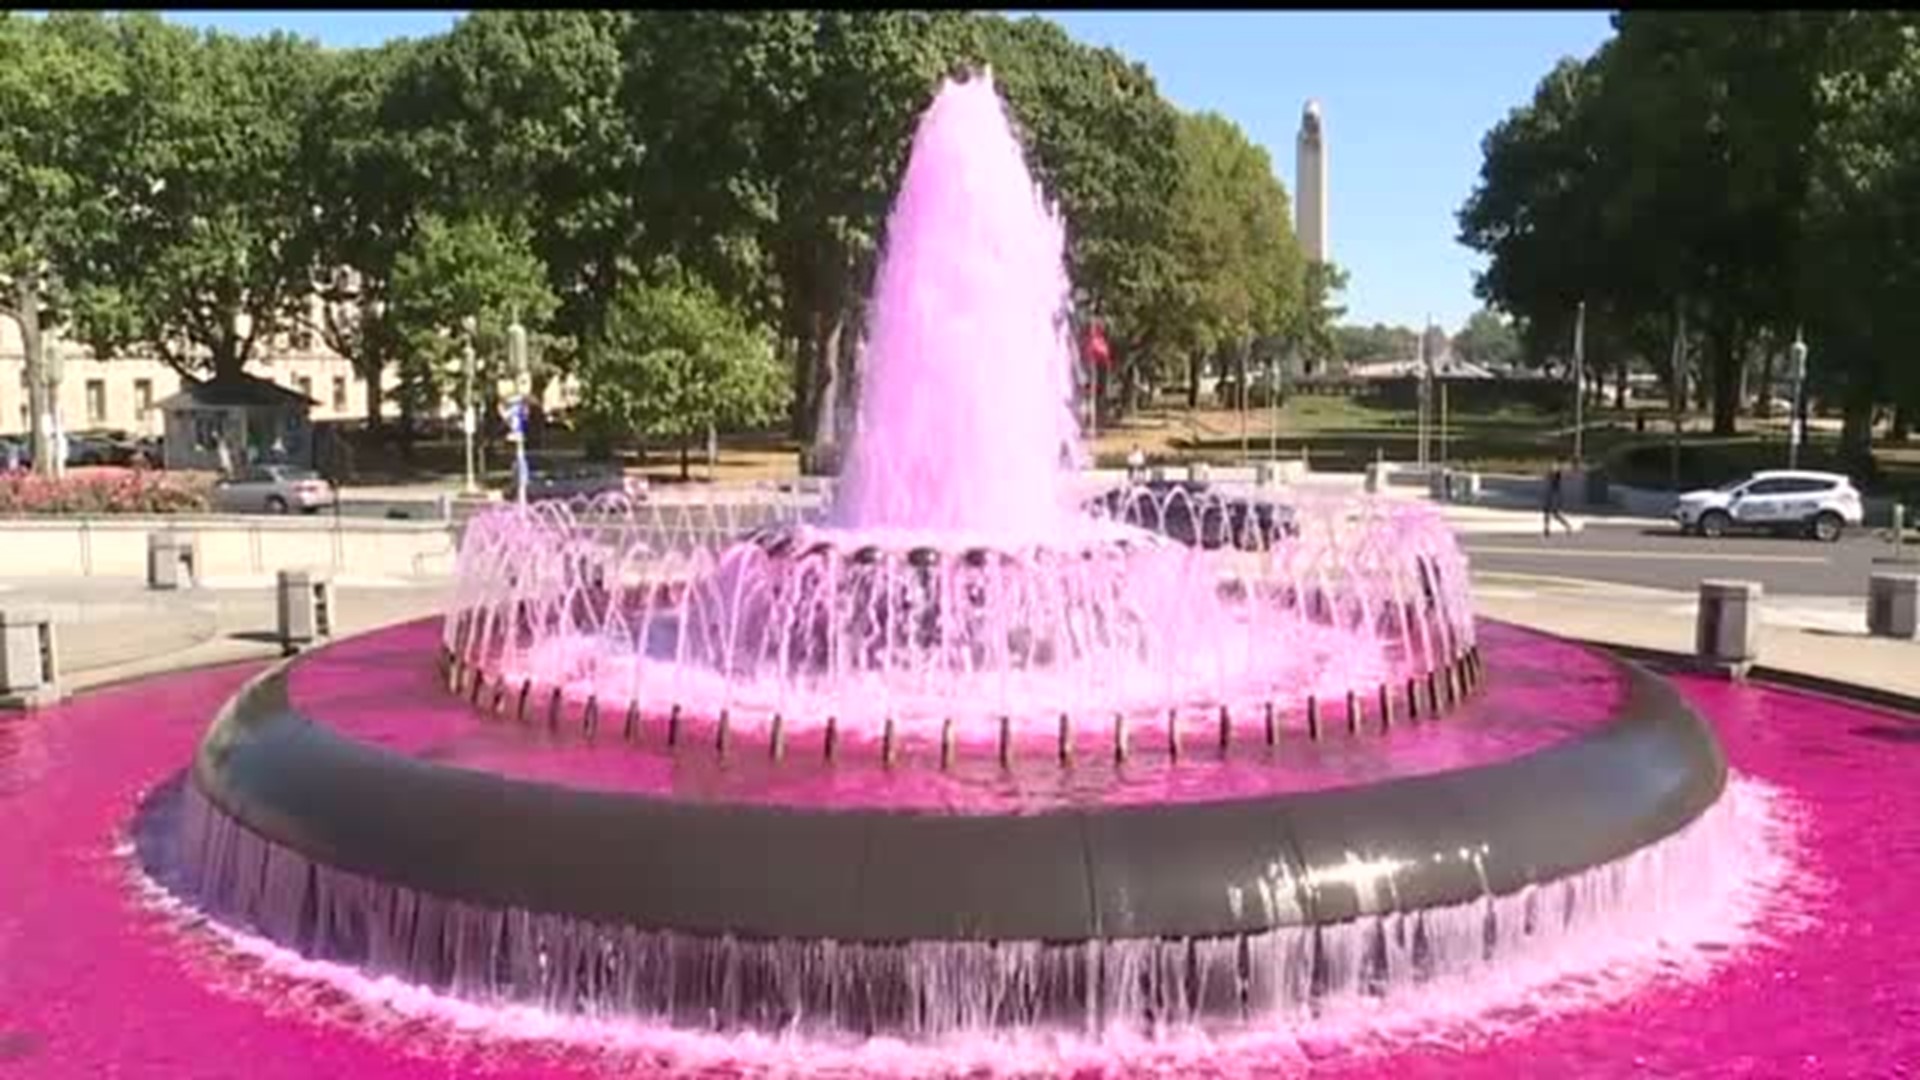 Capitol fountain turned pink for Breast Cancer Awareness